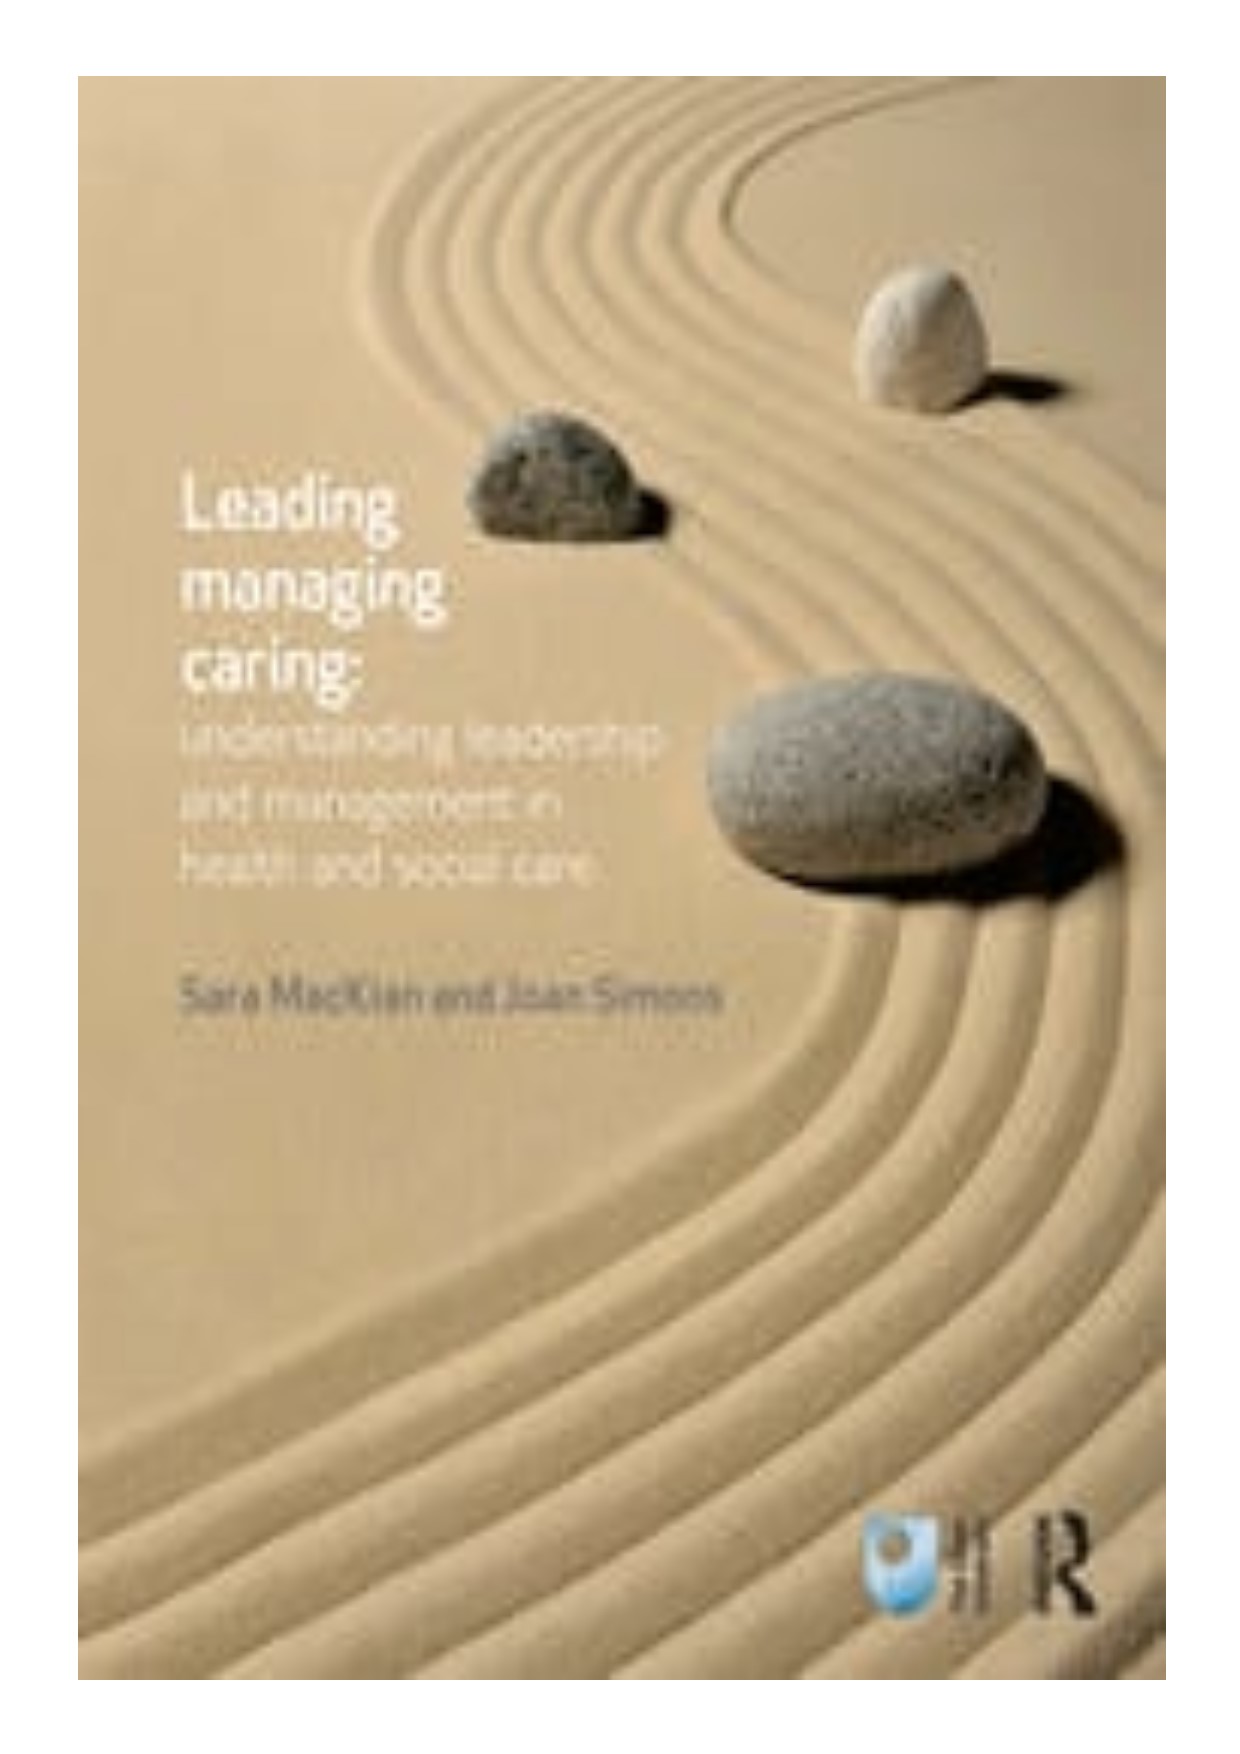 Leading, managing, caring understanding leadership and management in health and social care